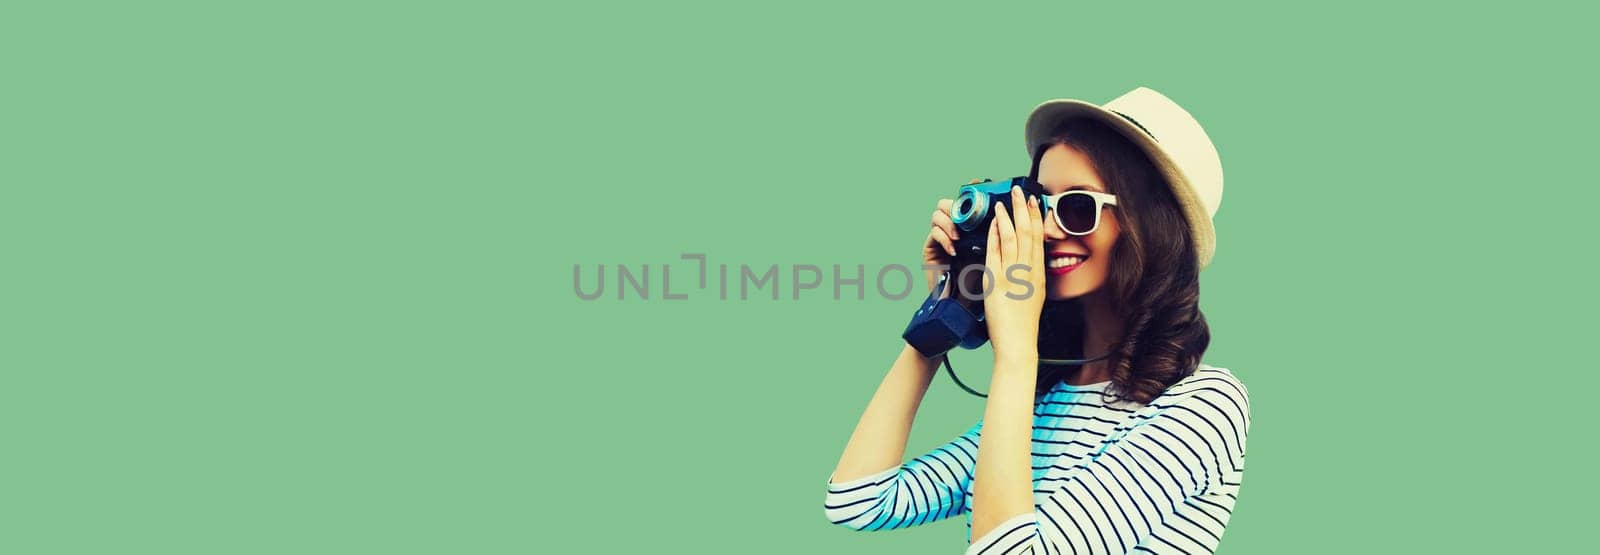 Summer portrait of happy smiling young woman photographer with film camera wearing summer straw hat on green background, blank copy space for advertising text